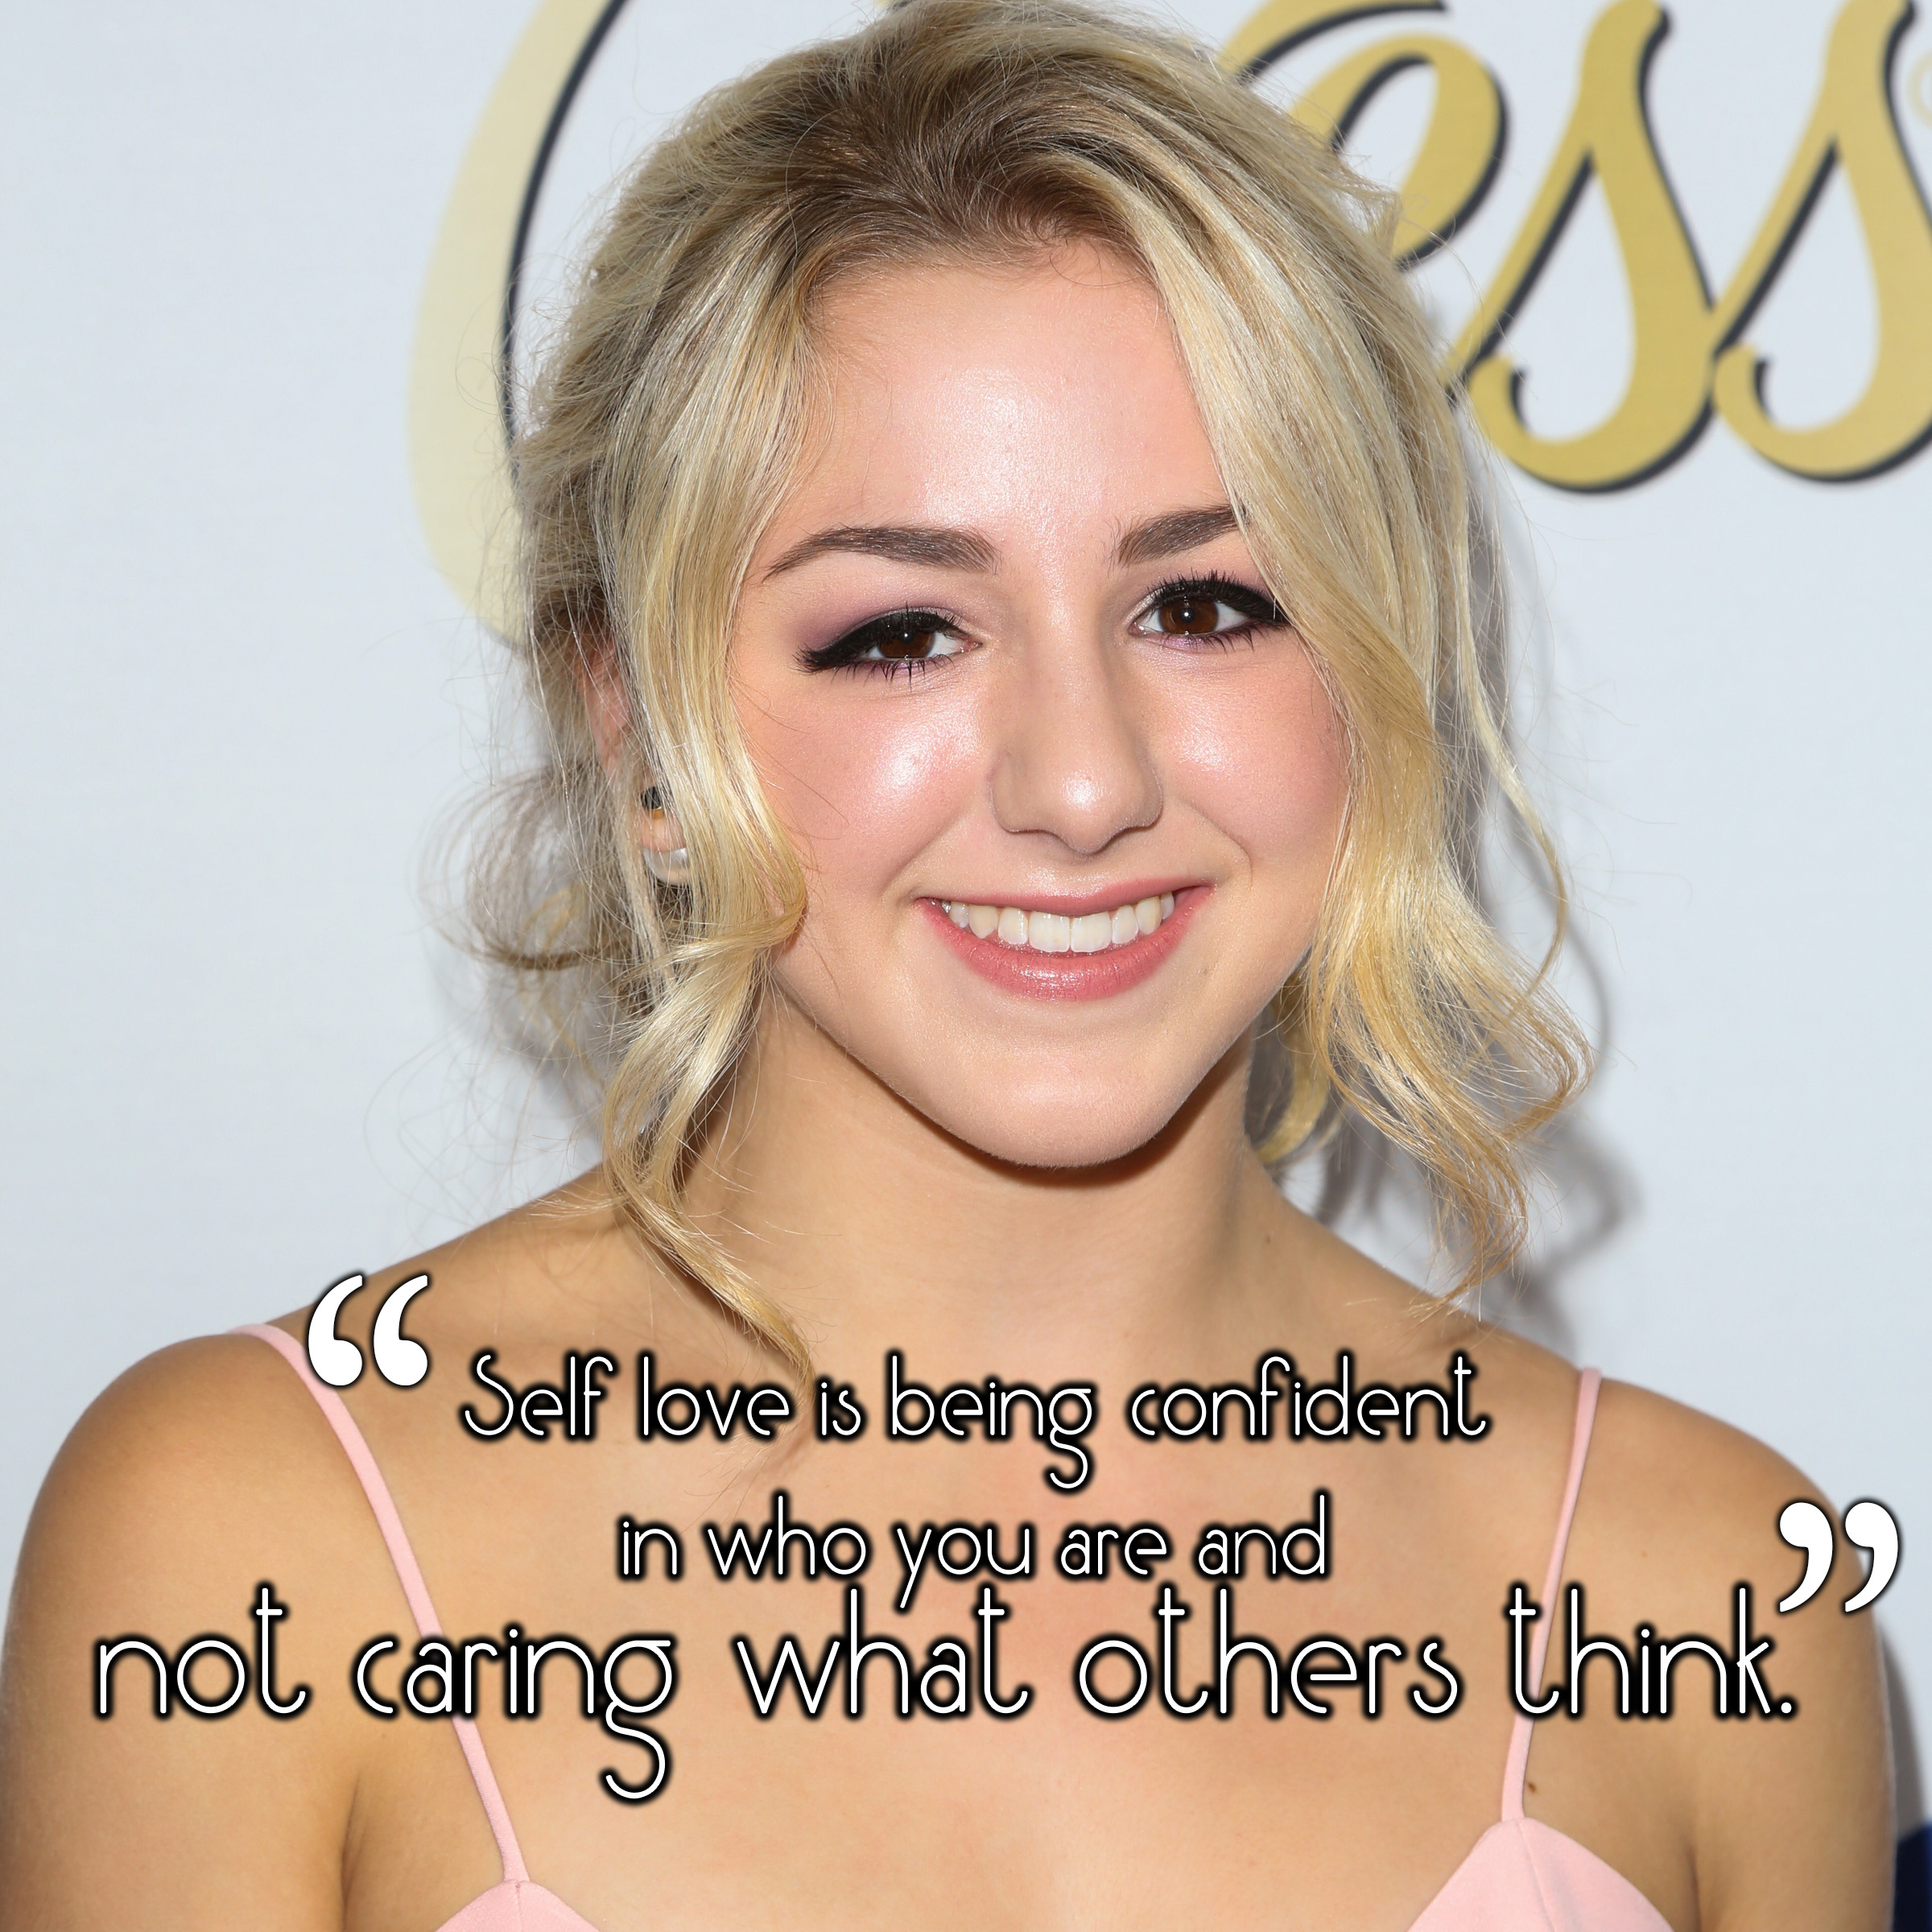 Chloe Lukasiak Porn - See Chloe Lukasiak's Most Inspirational Quotes of All Time - Life & Style